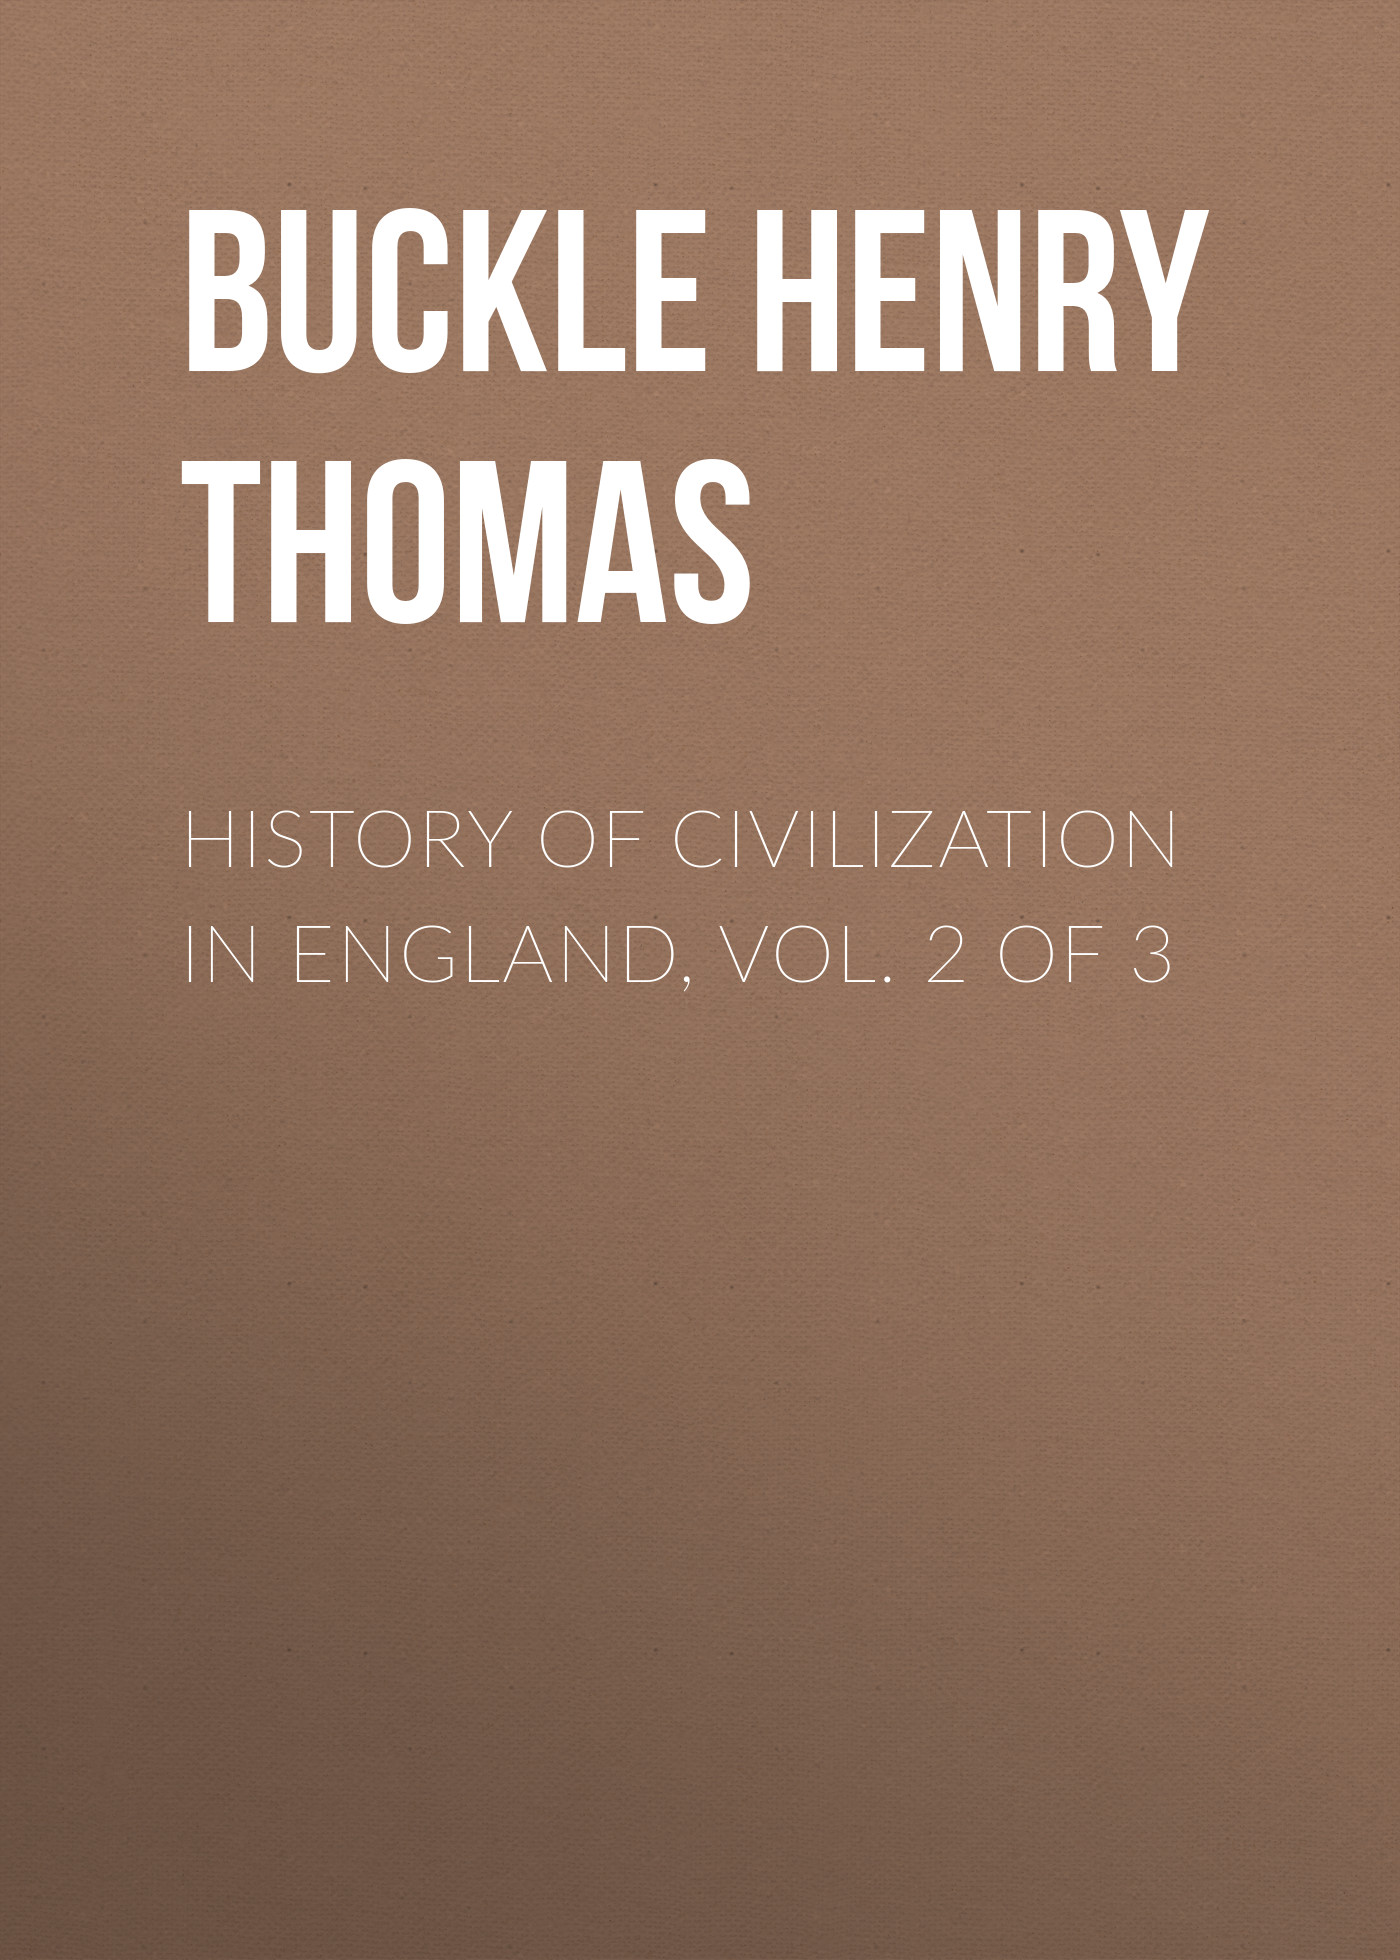 History of Civilization in England, Vol. 2 of 3